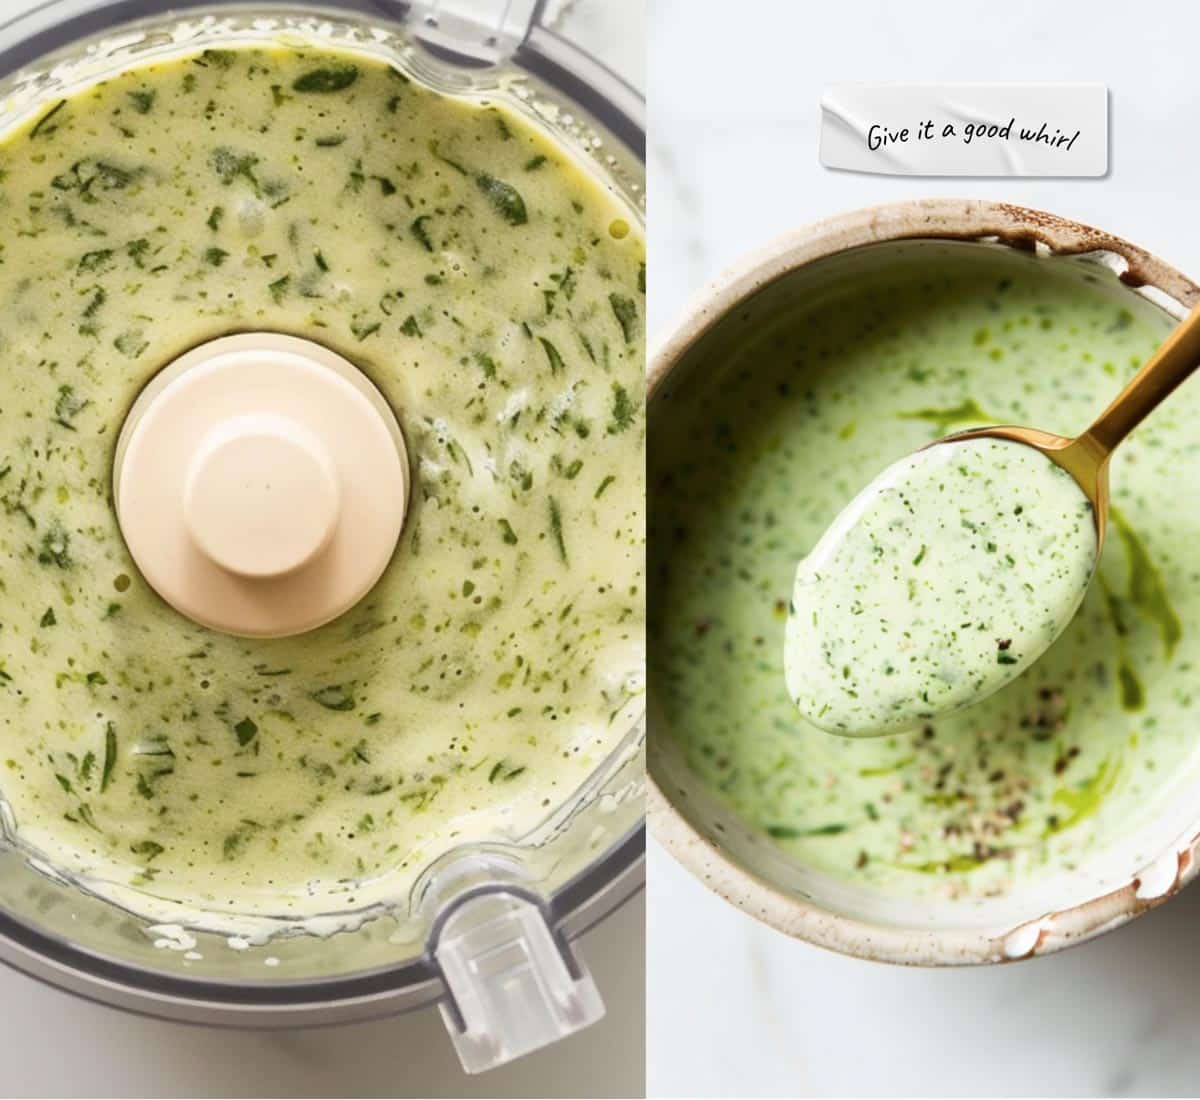 Basil leaves, herbs, and cheese being blended into a bright green sauce in a blender.